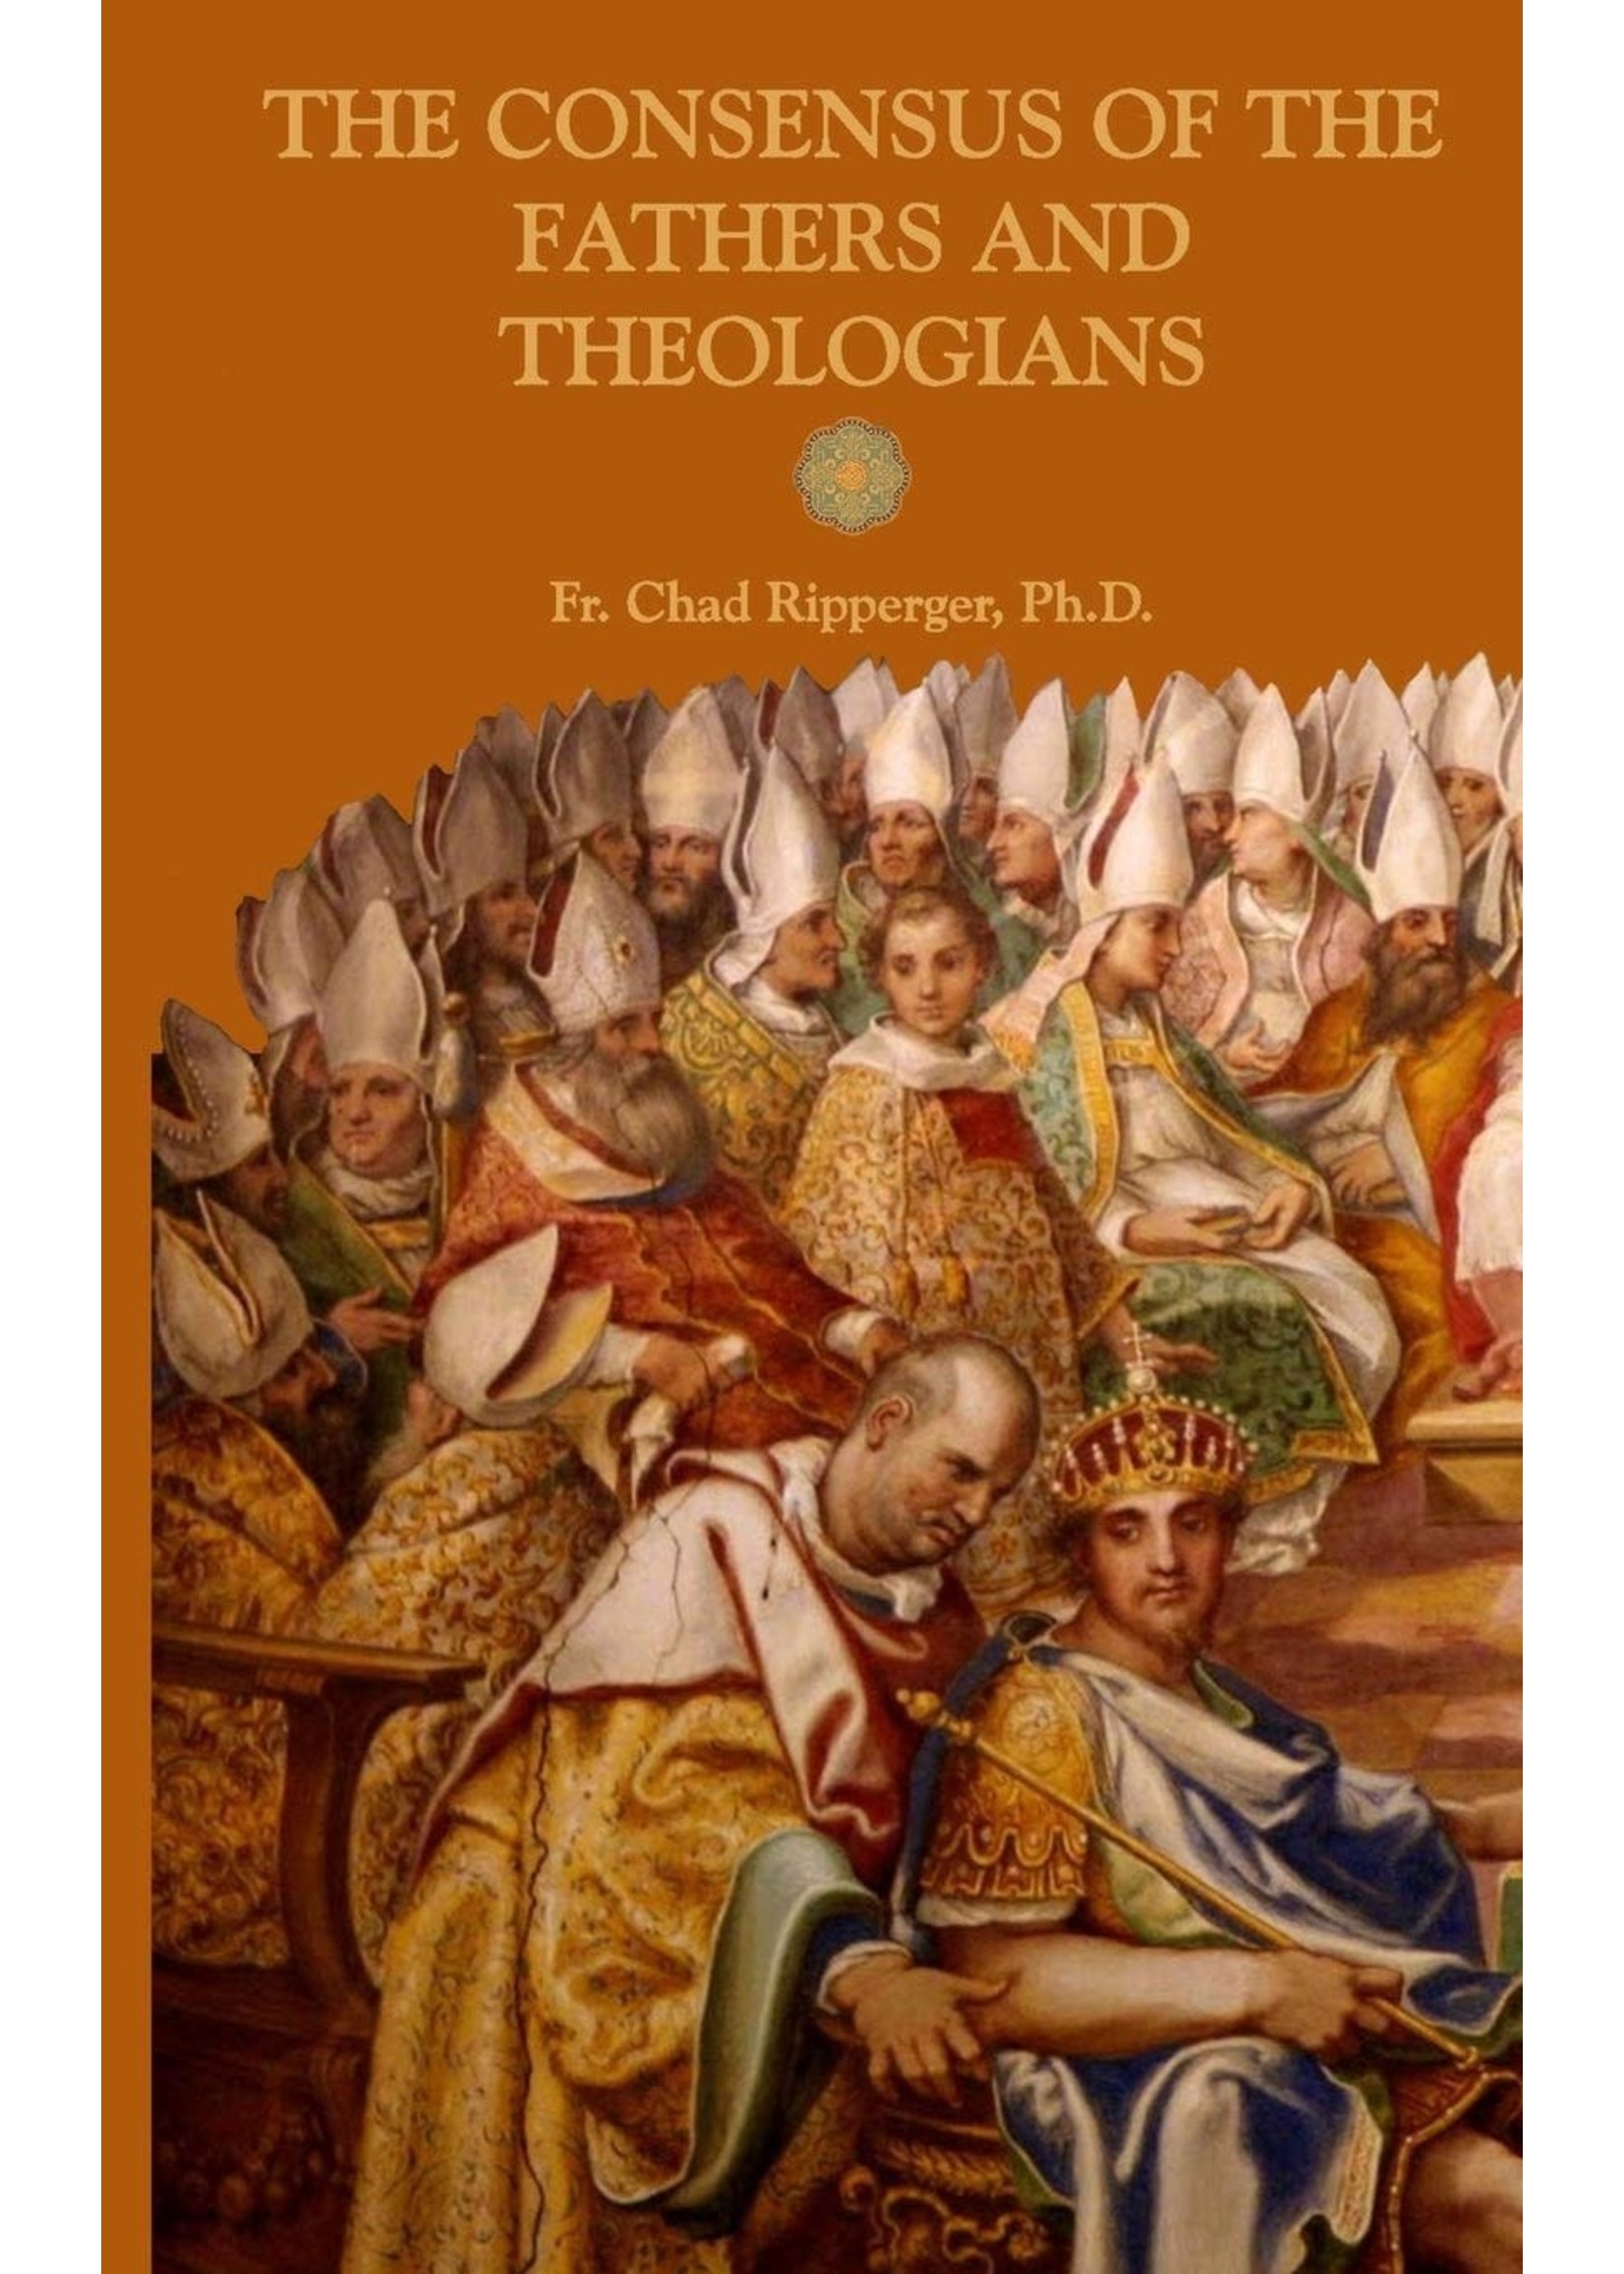 The Consensus of the Fathers & Theologians